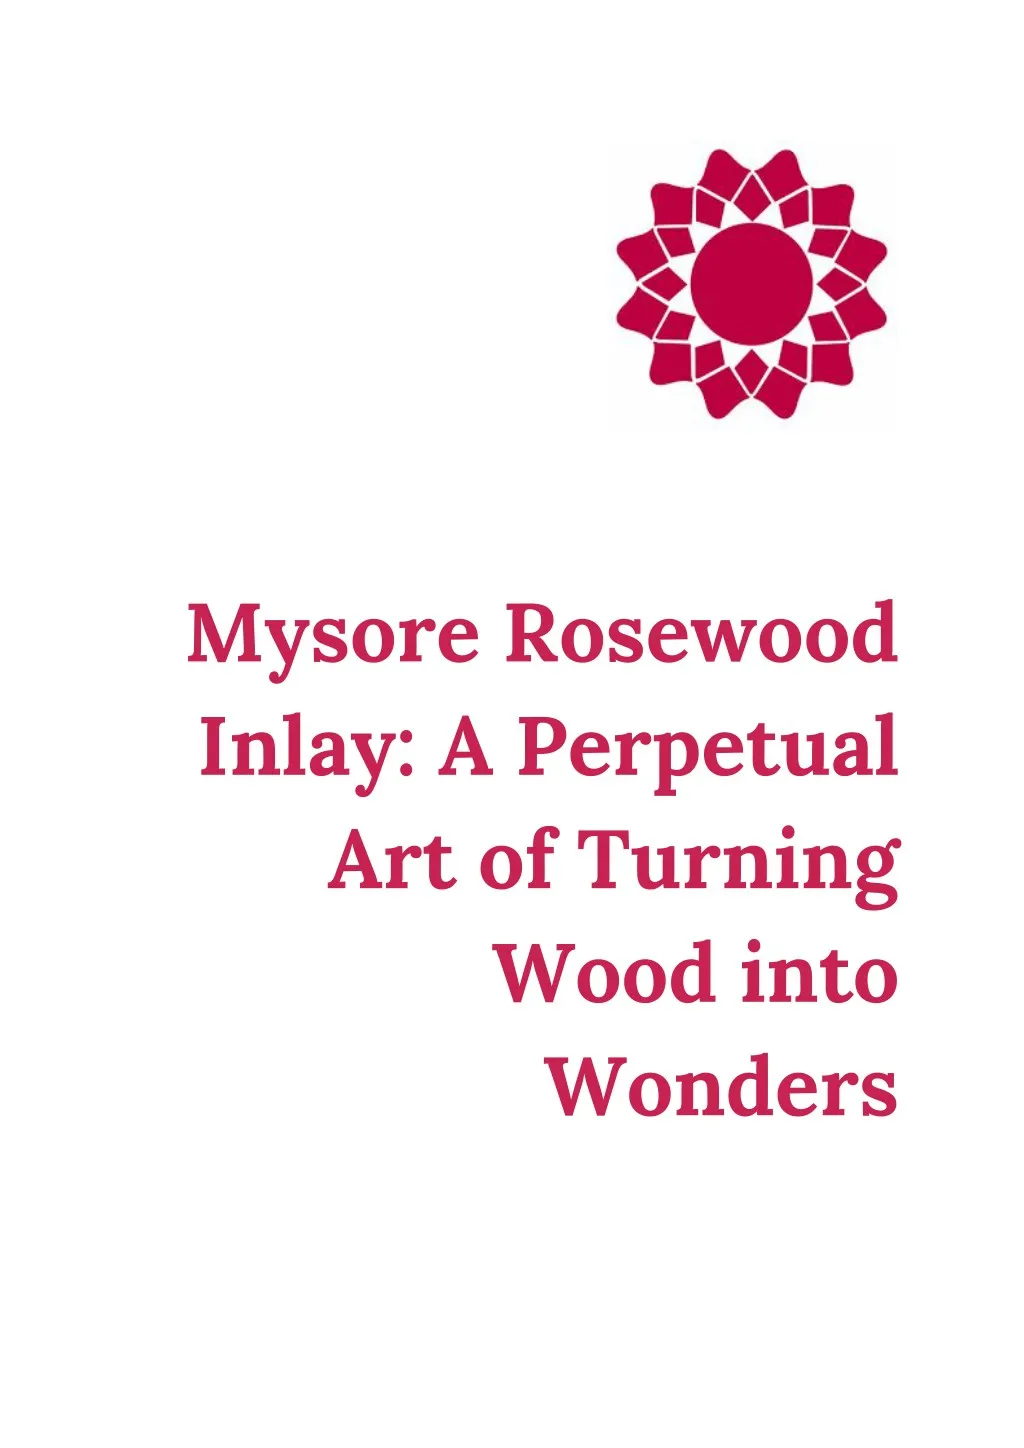 mysore rosewood inlay a perpetual art of turning